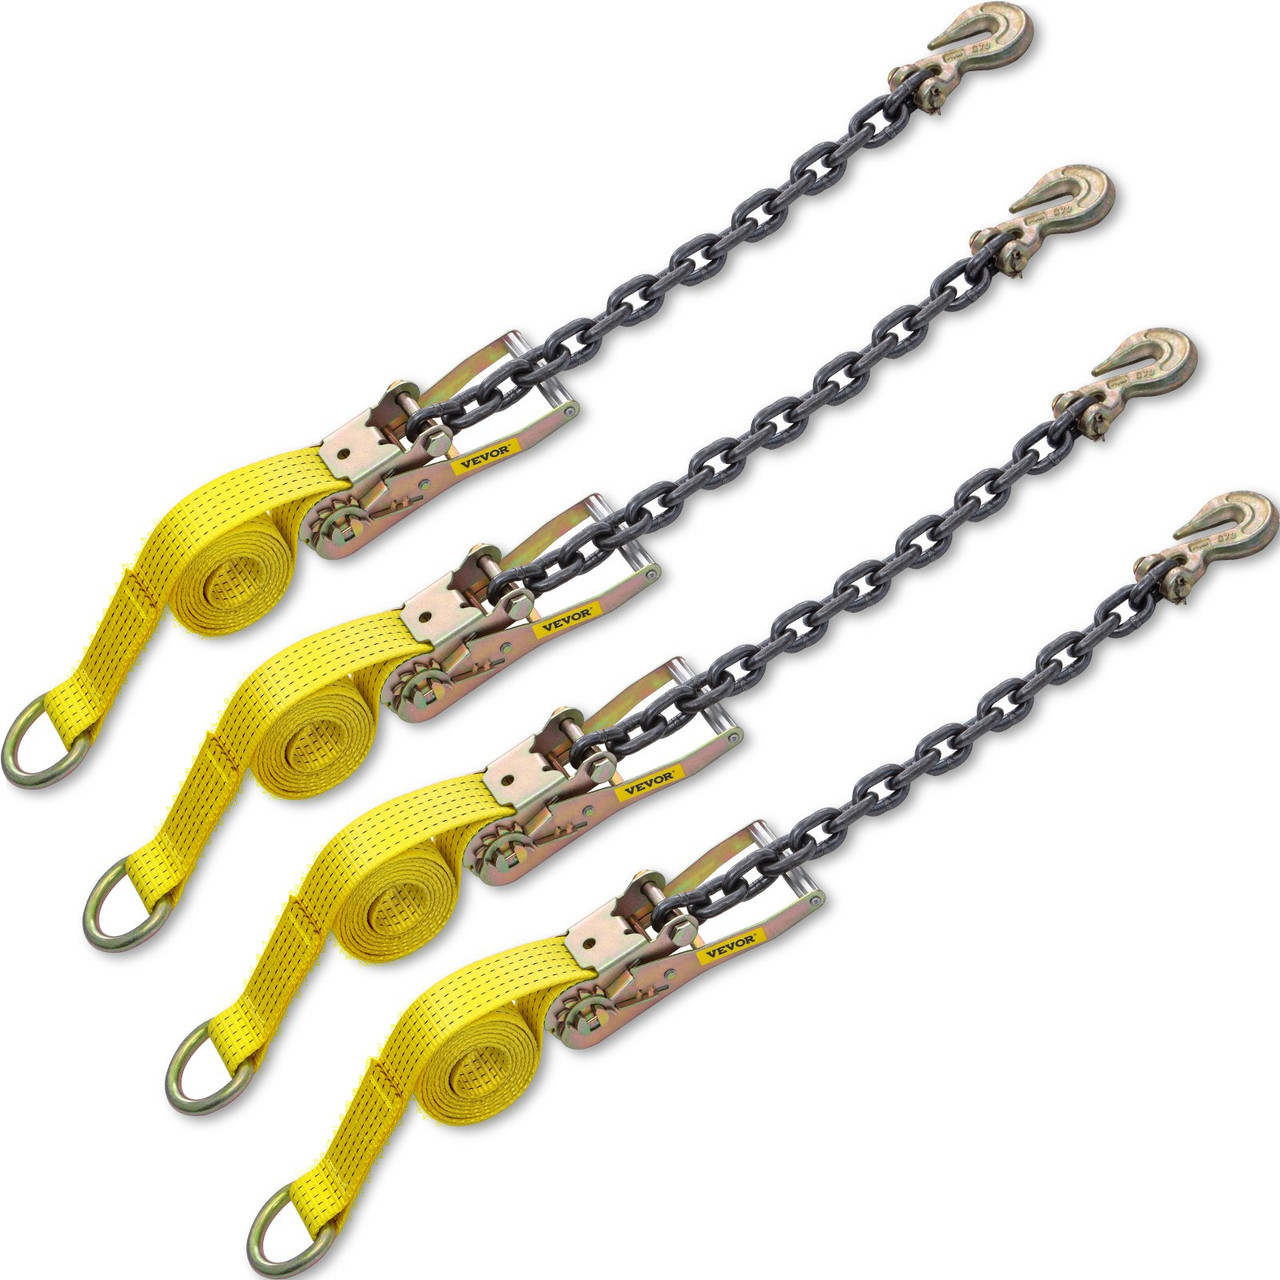 Ratchet Tie Down Strap Ratchet Strap 9.8FT x 2in Yellow 4pcs Fastening